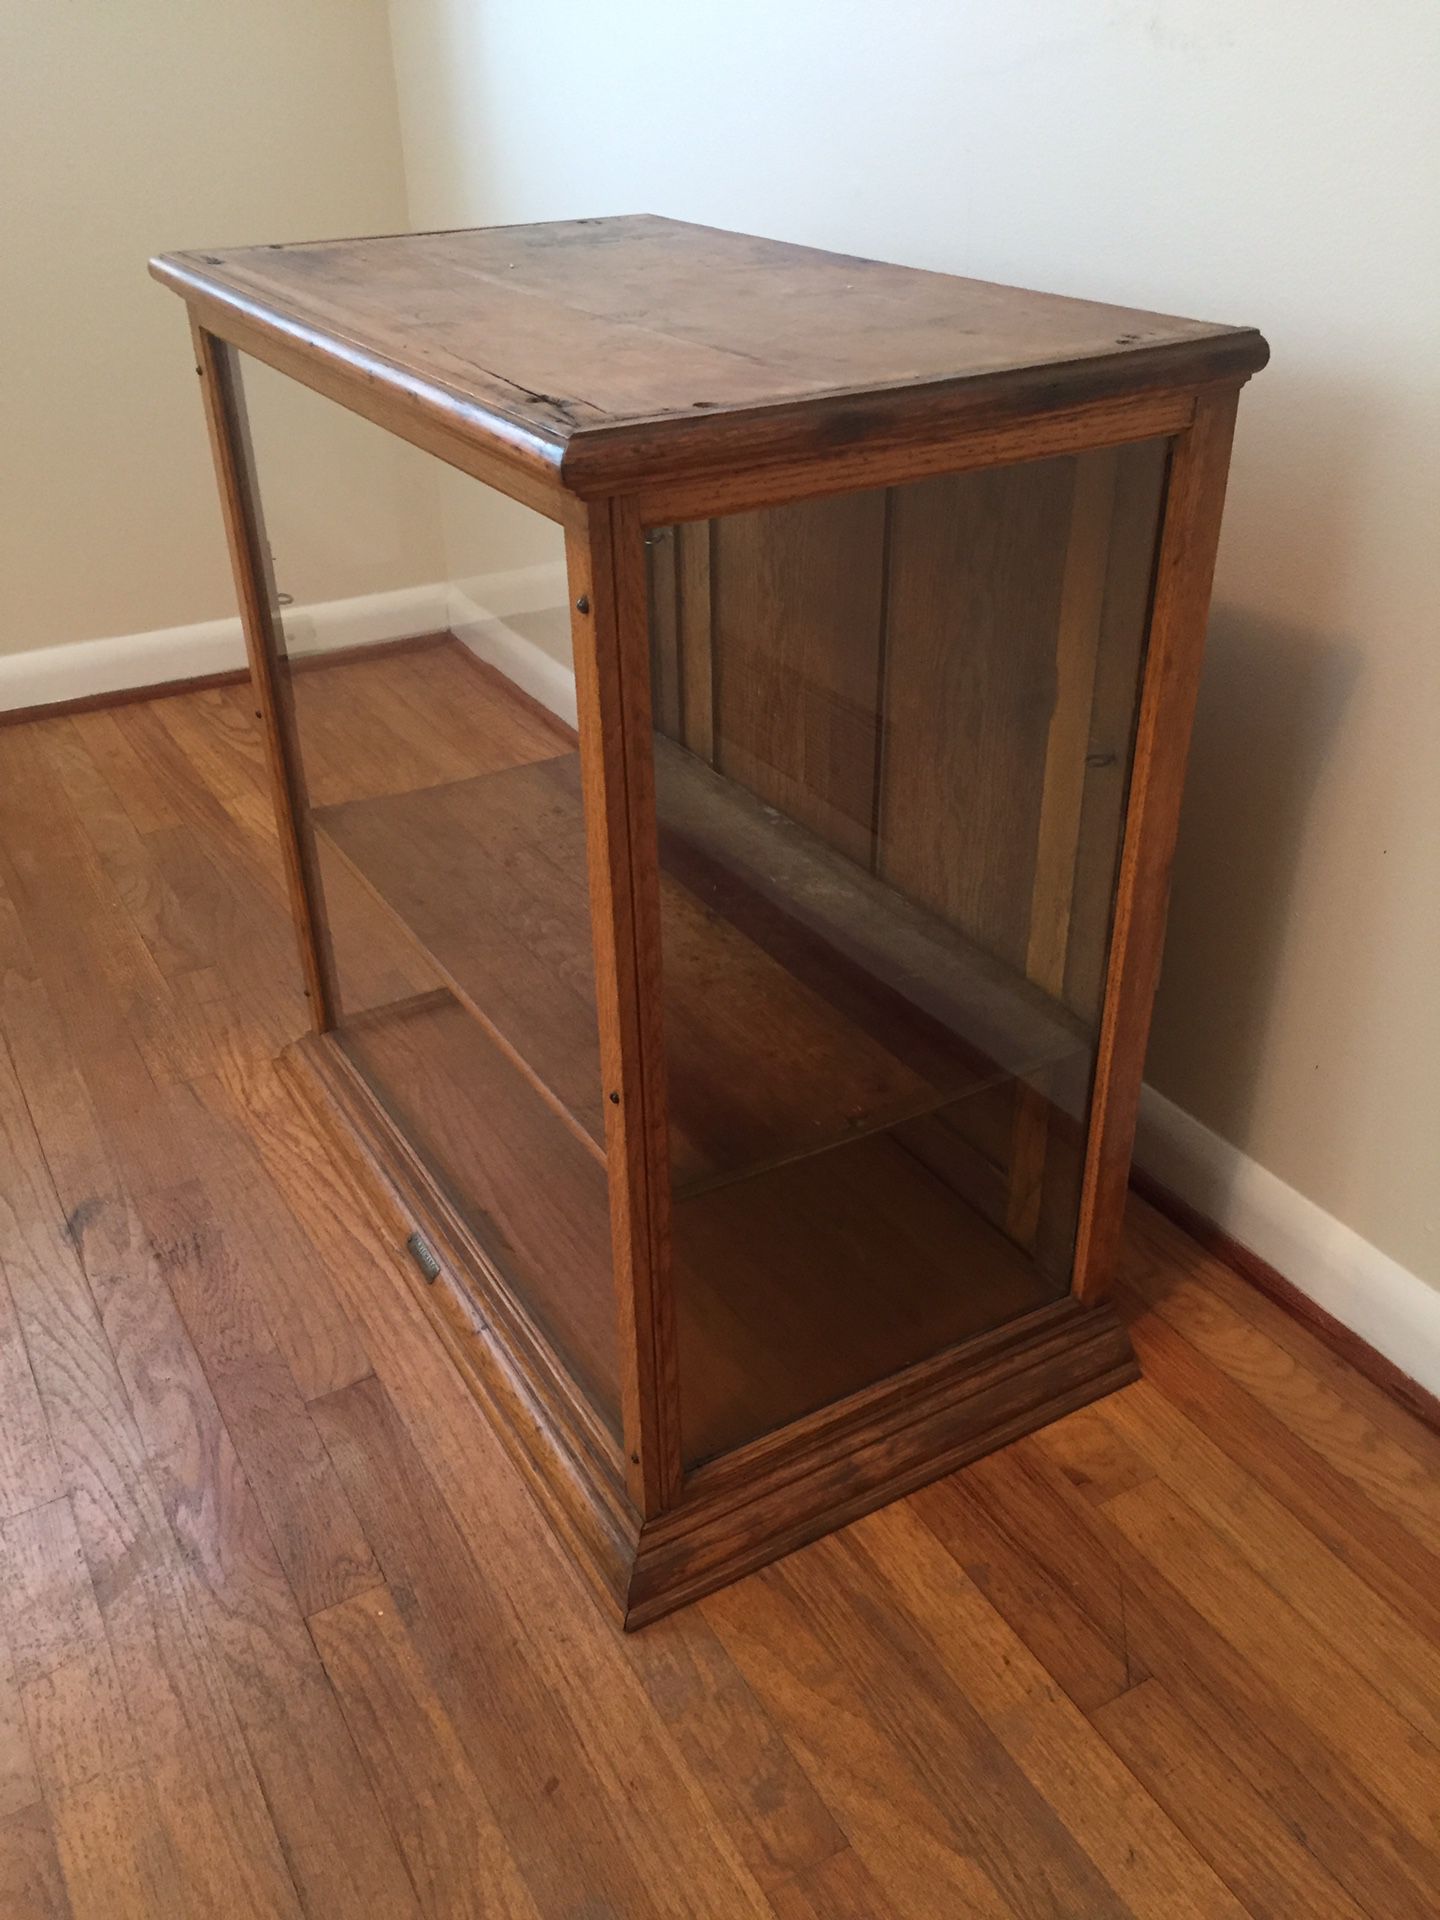 Antique Wood Store Display Case